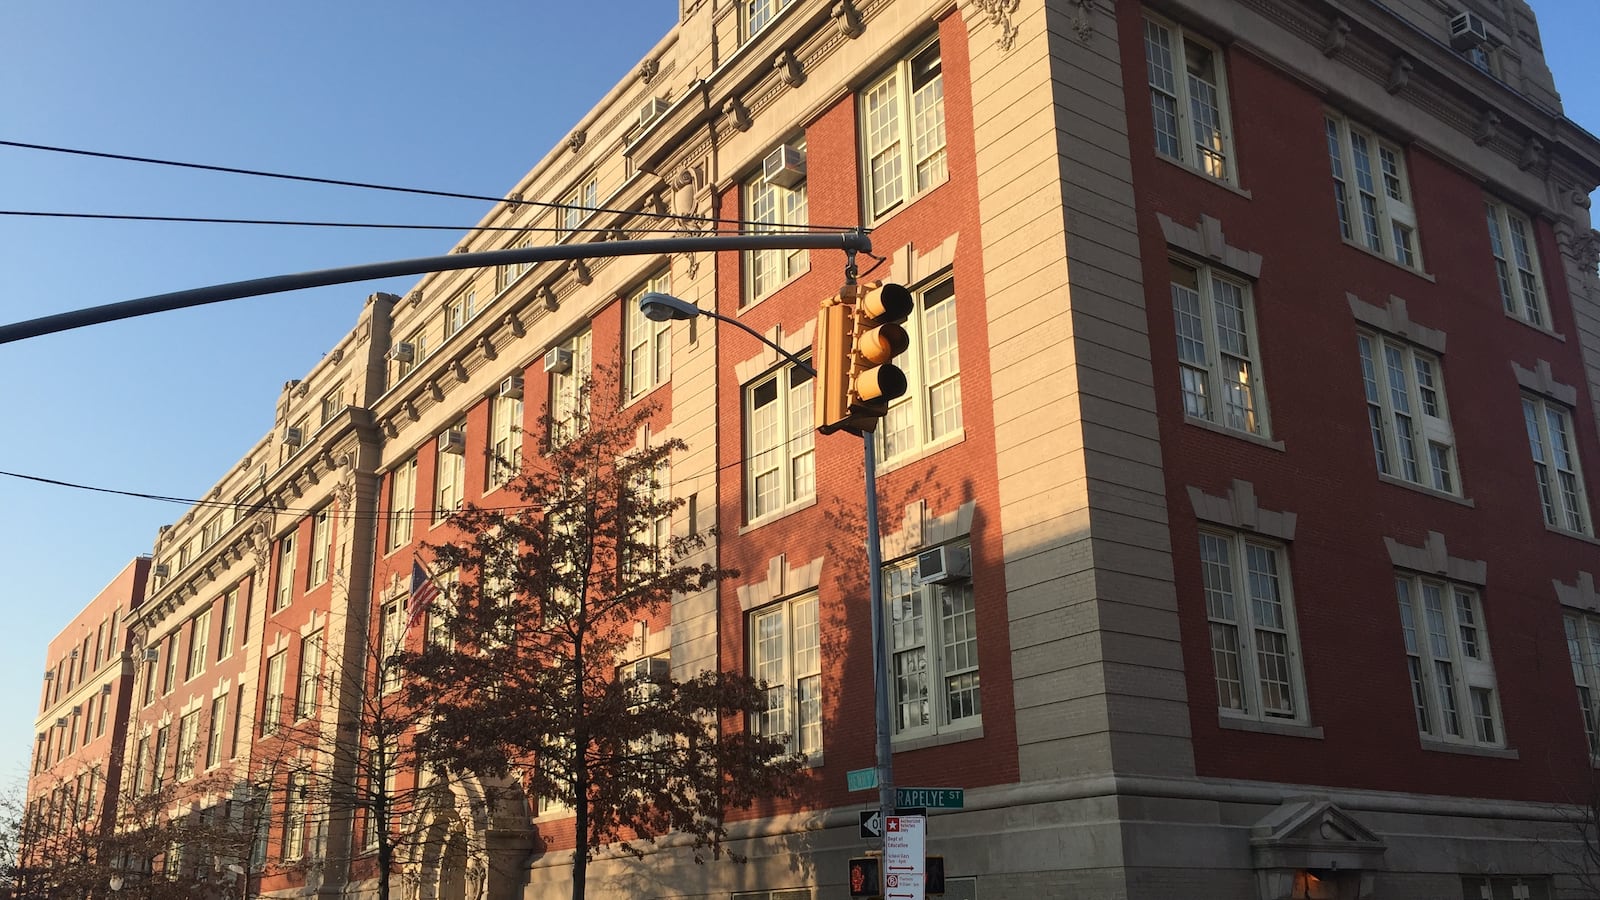 A recent essay in the Atlantic details one family's experience at the Brookyln New School and in District 15.